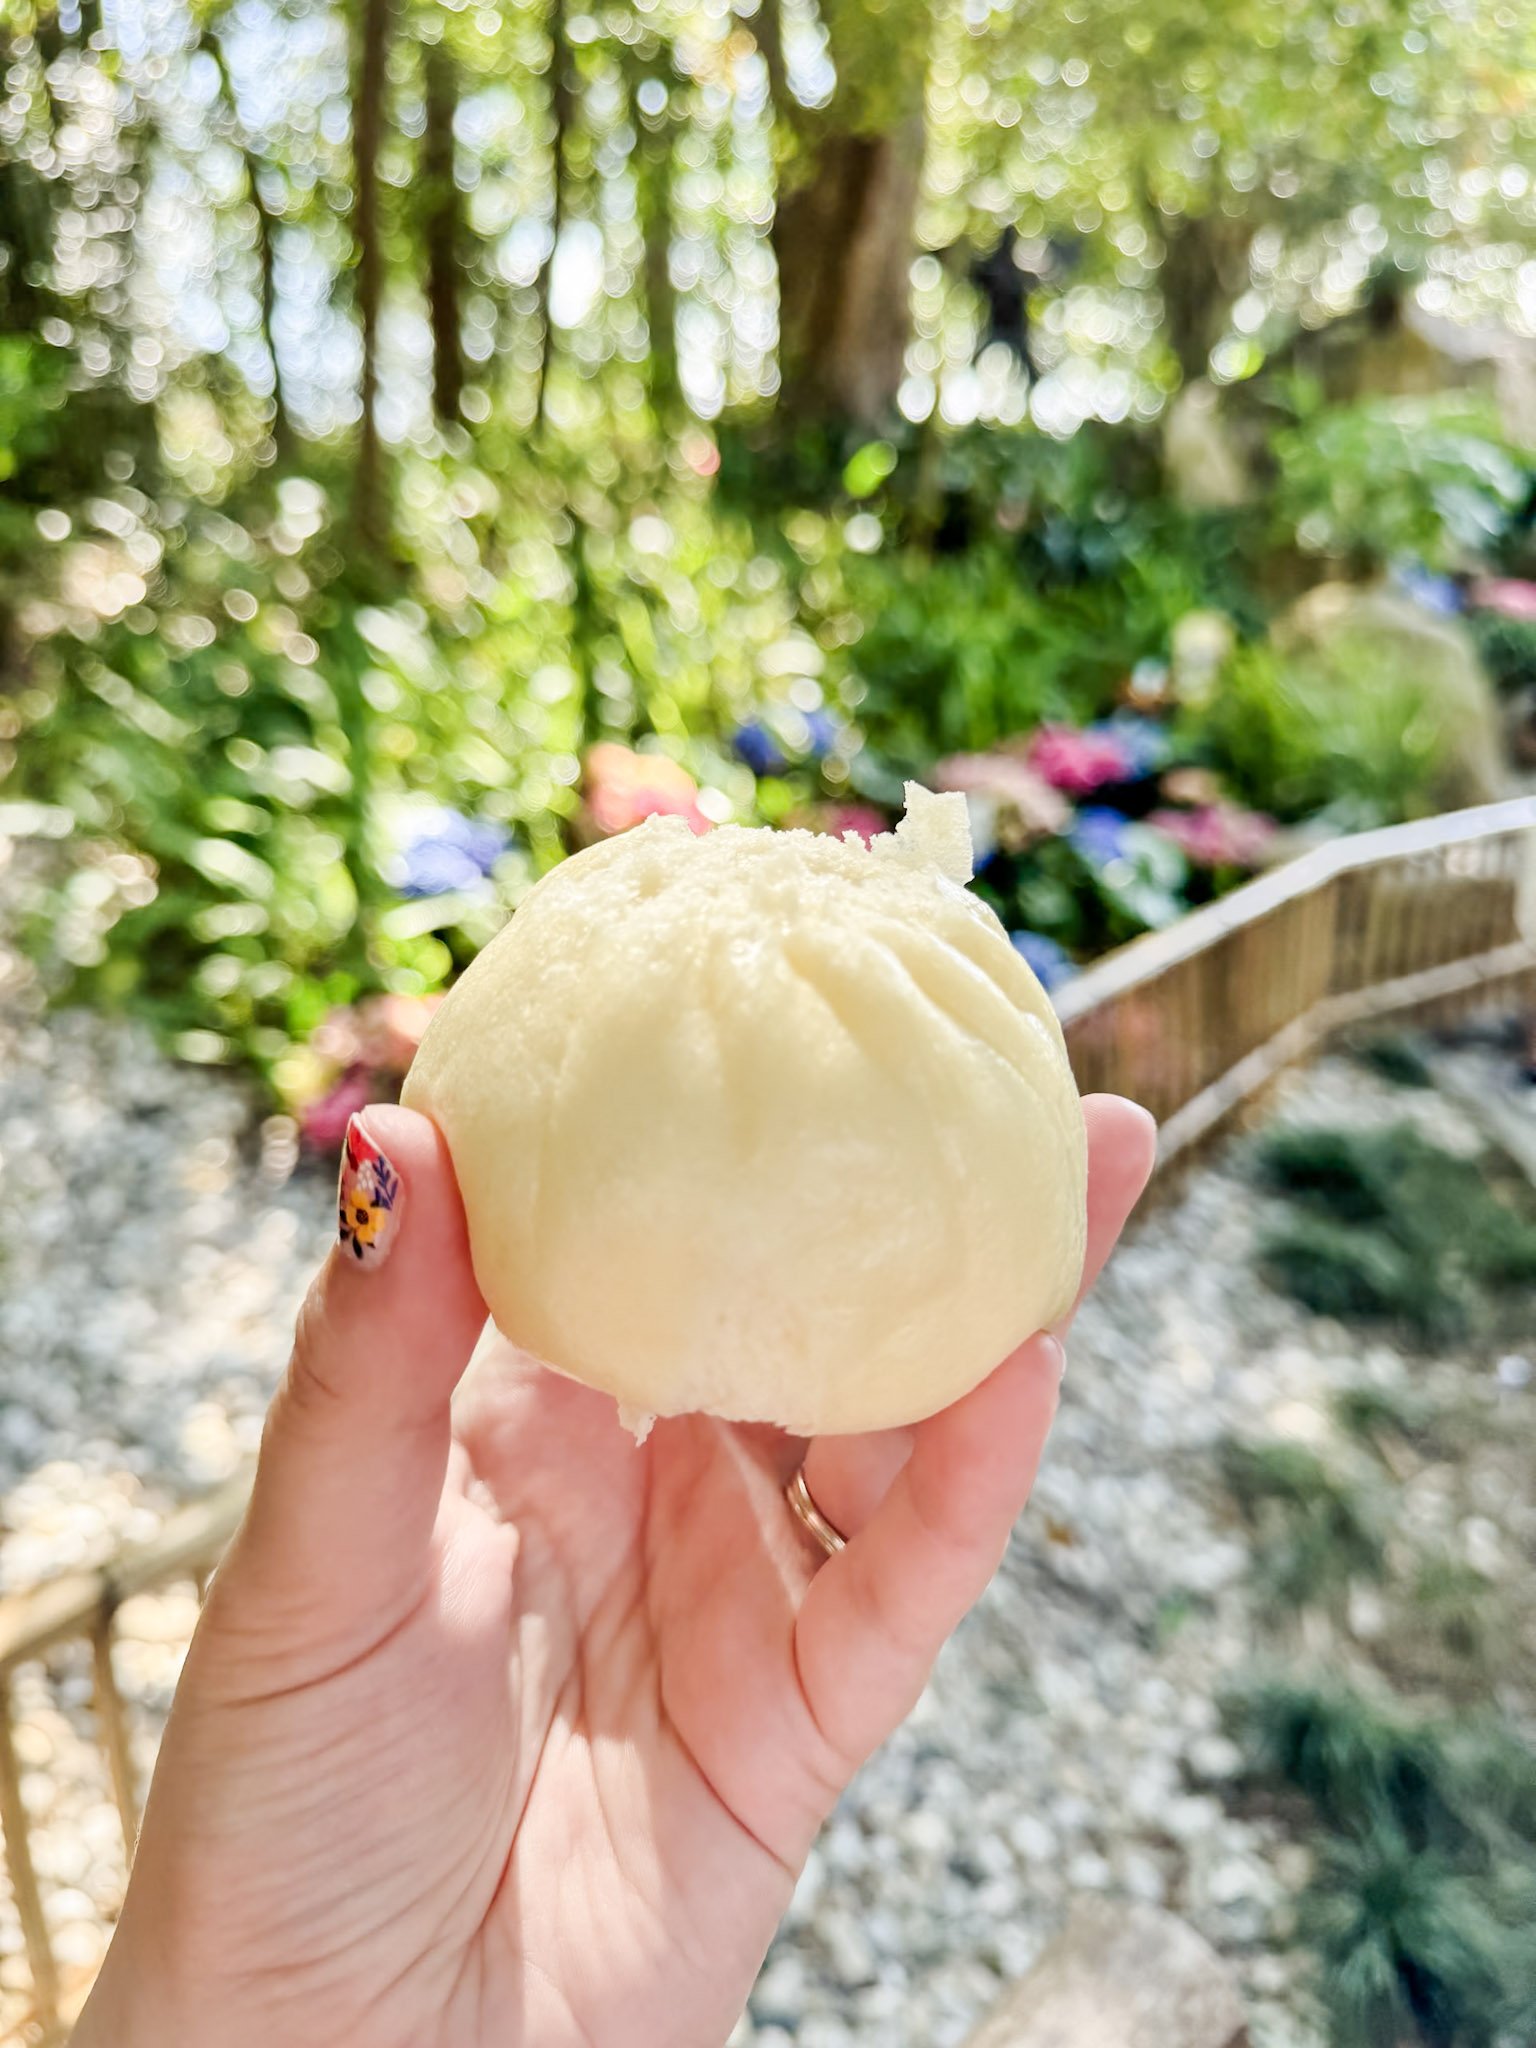 Steam Bun filled with Vegetables and Plant-based Soy Meat (plant-based)